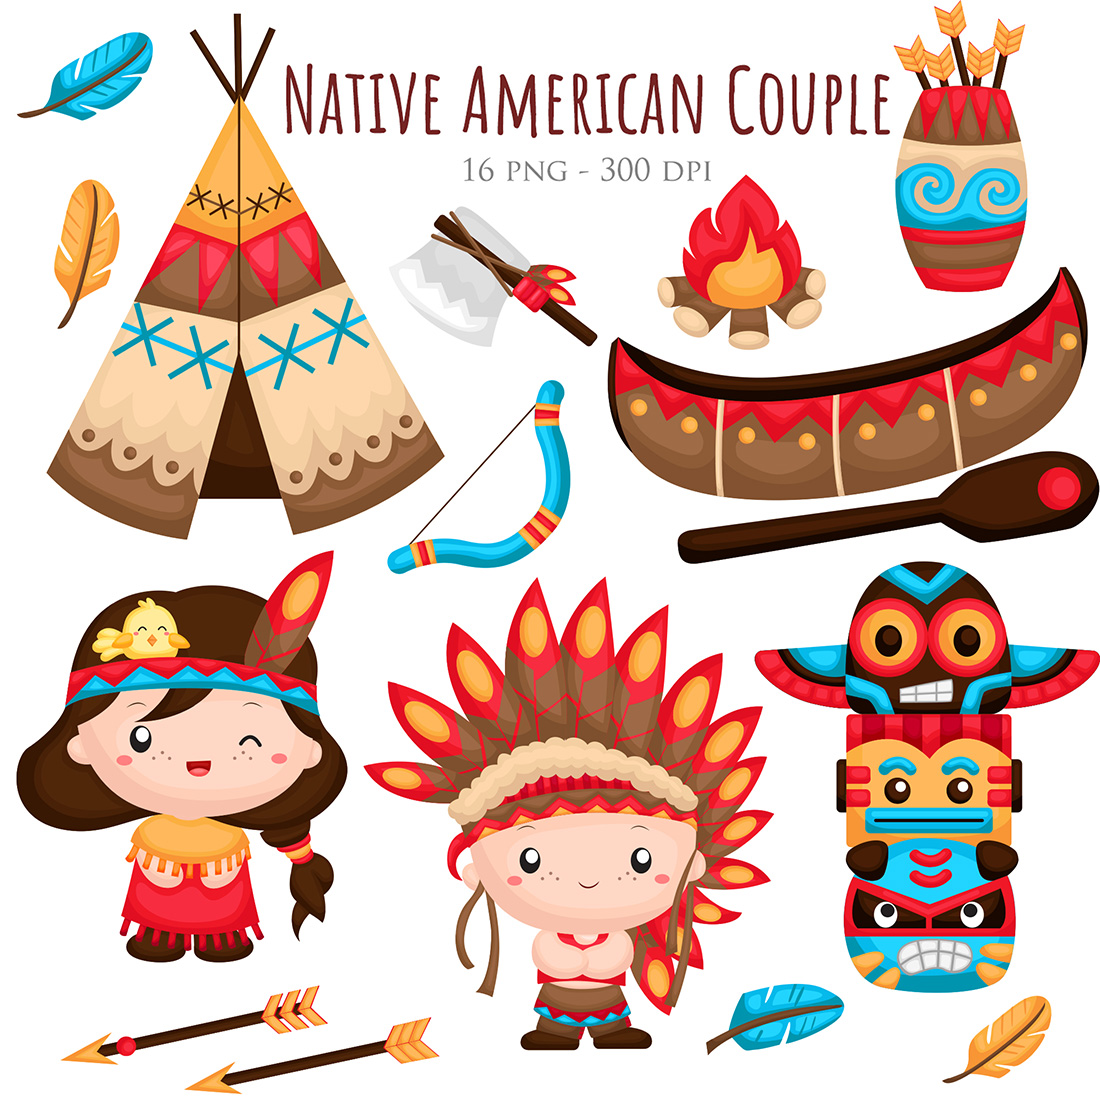 Cute Native American Couple Kids Indians Culture Costume and Ornaments Decoration Object Cartoon Illustration Vector Clipart Sticker Background cover image.